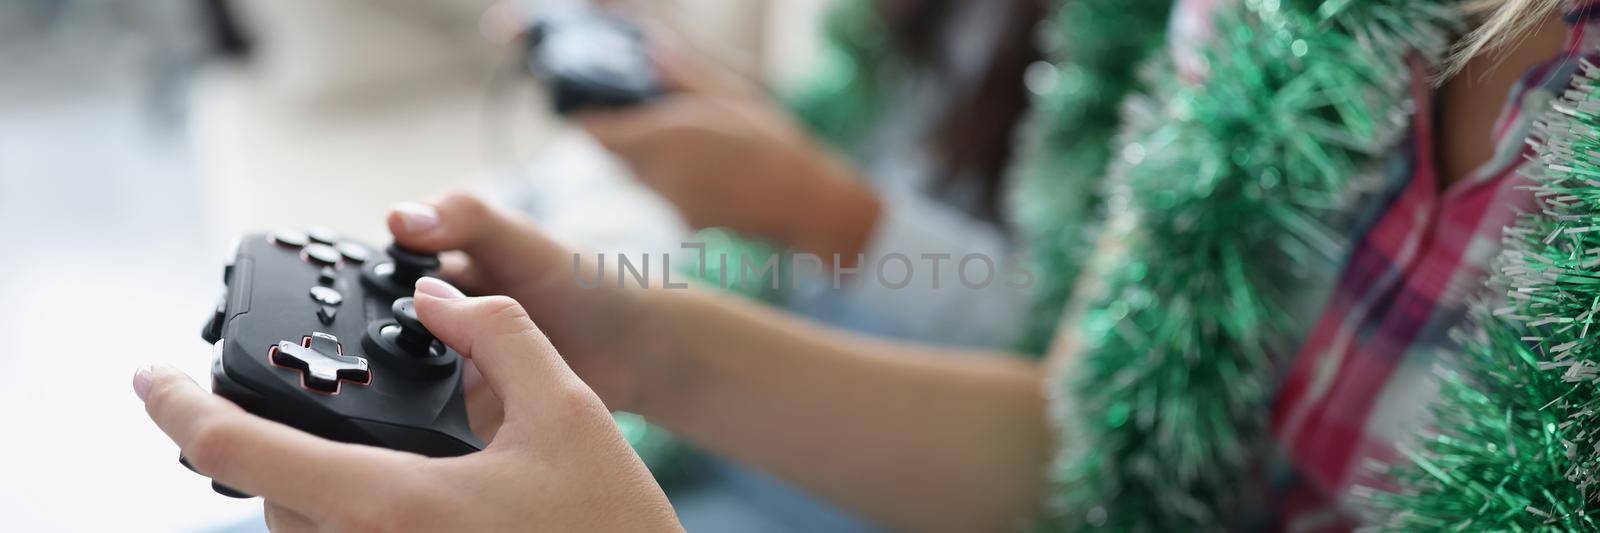 Close-up of people pressing buttons on joystick, playing video games for fun, killing time on weekend, wearing festive decor. Funny pastime, hobby, addiction, leisure, new year concept